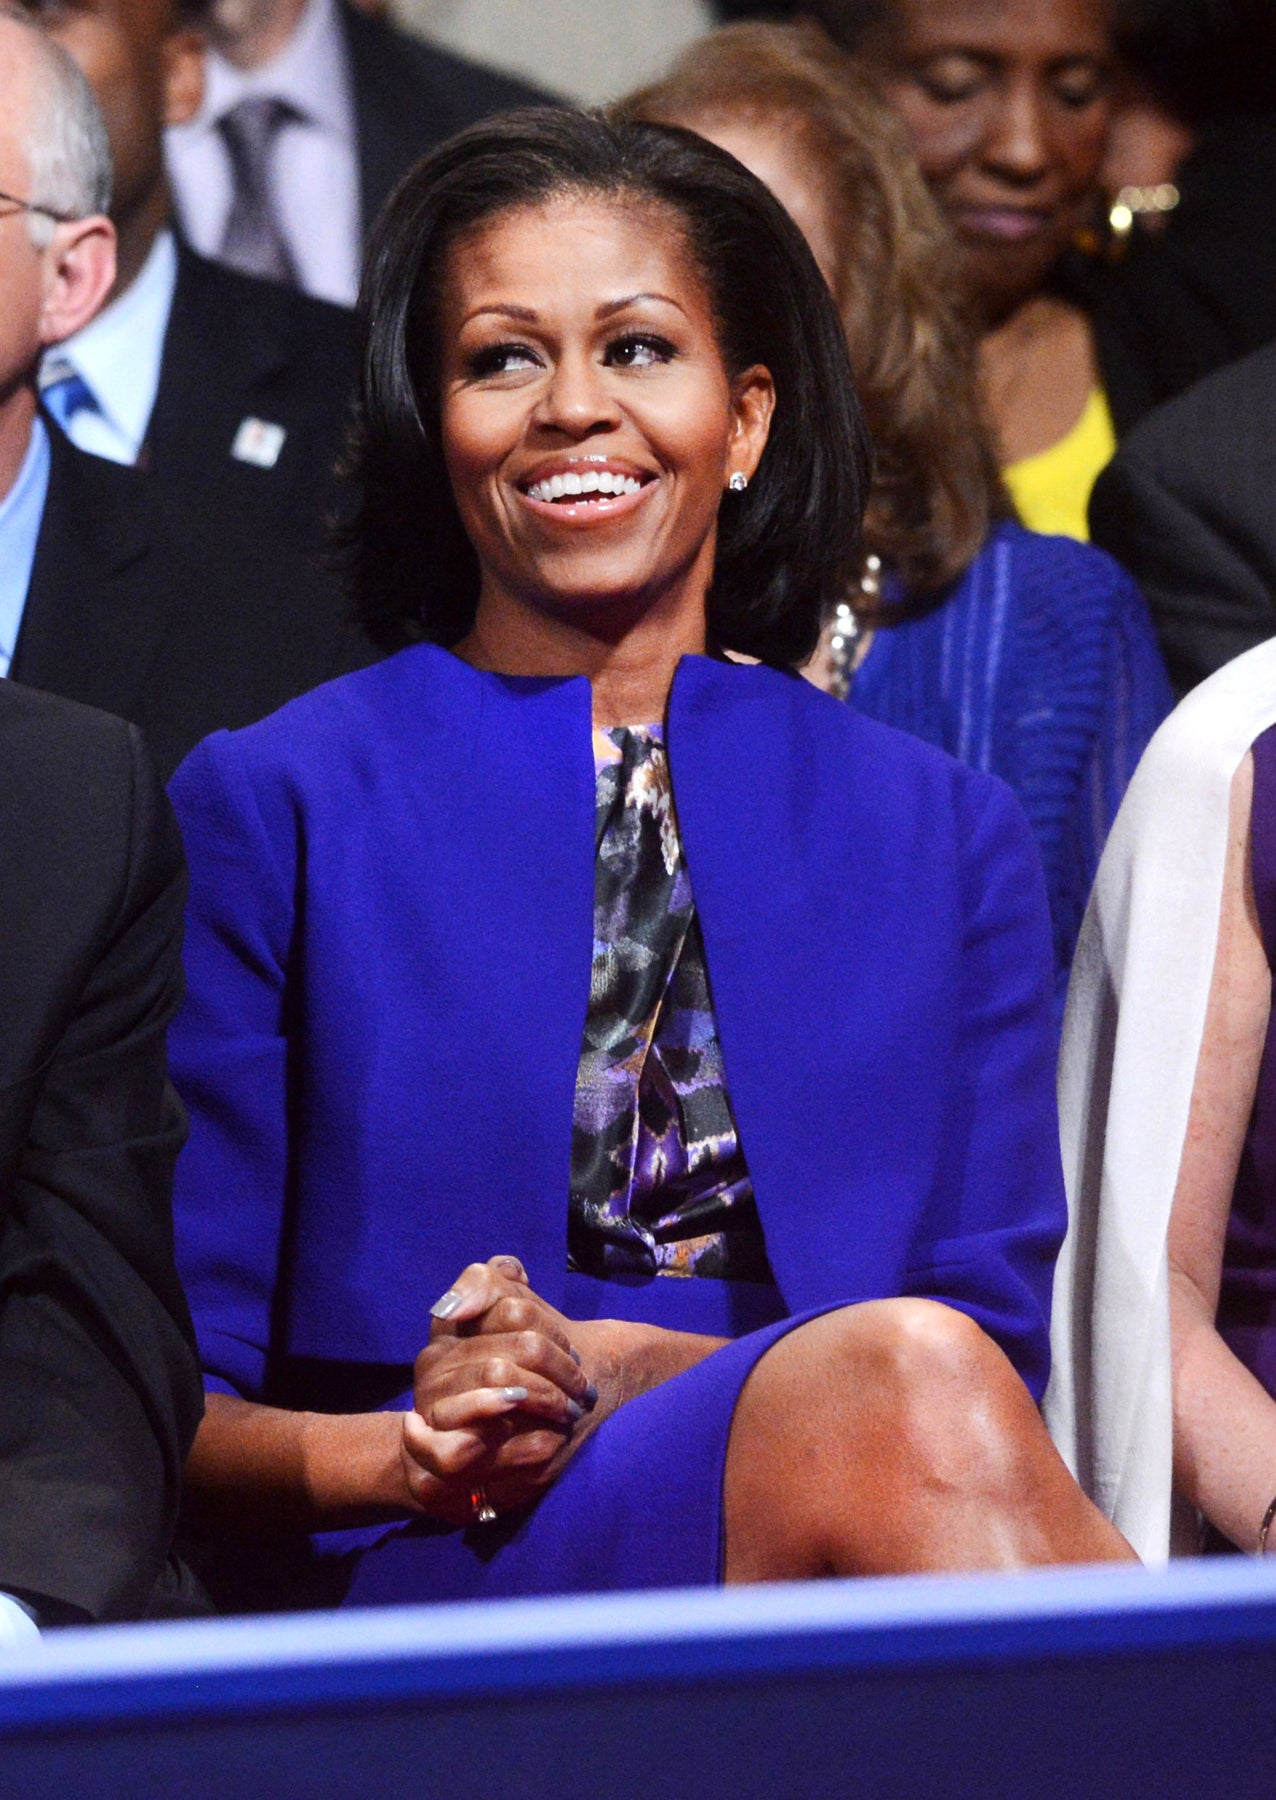 First Lady Confident about Second Debate